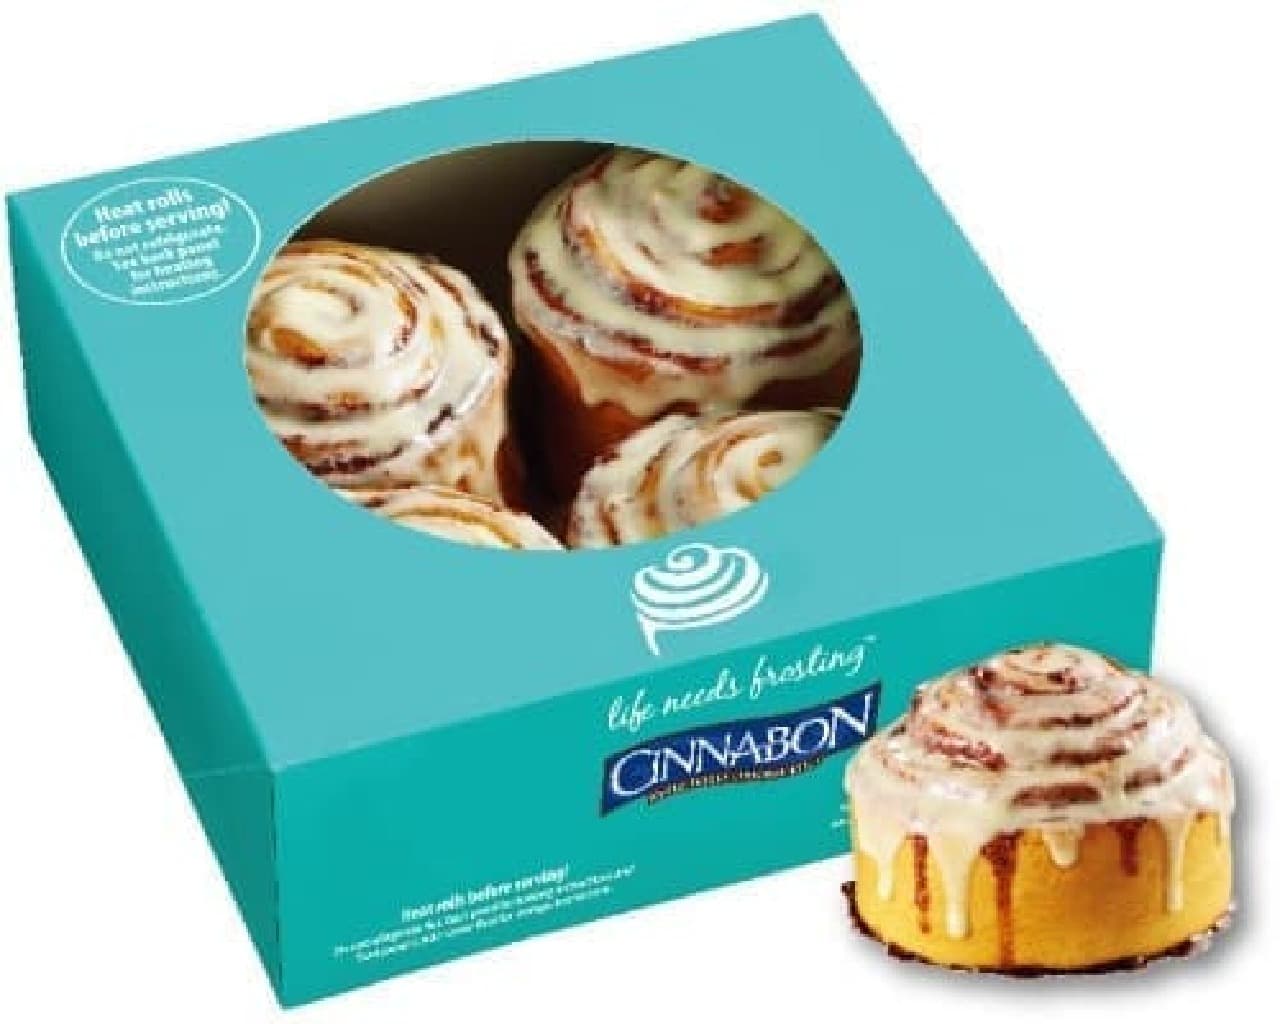 How about a souvenir of cinnamon rolls that are loved in the world?